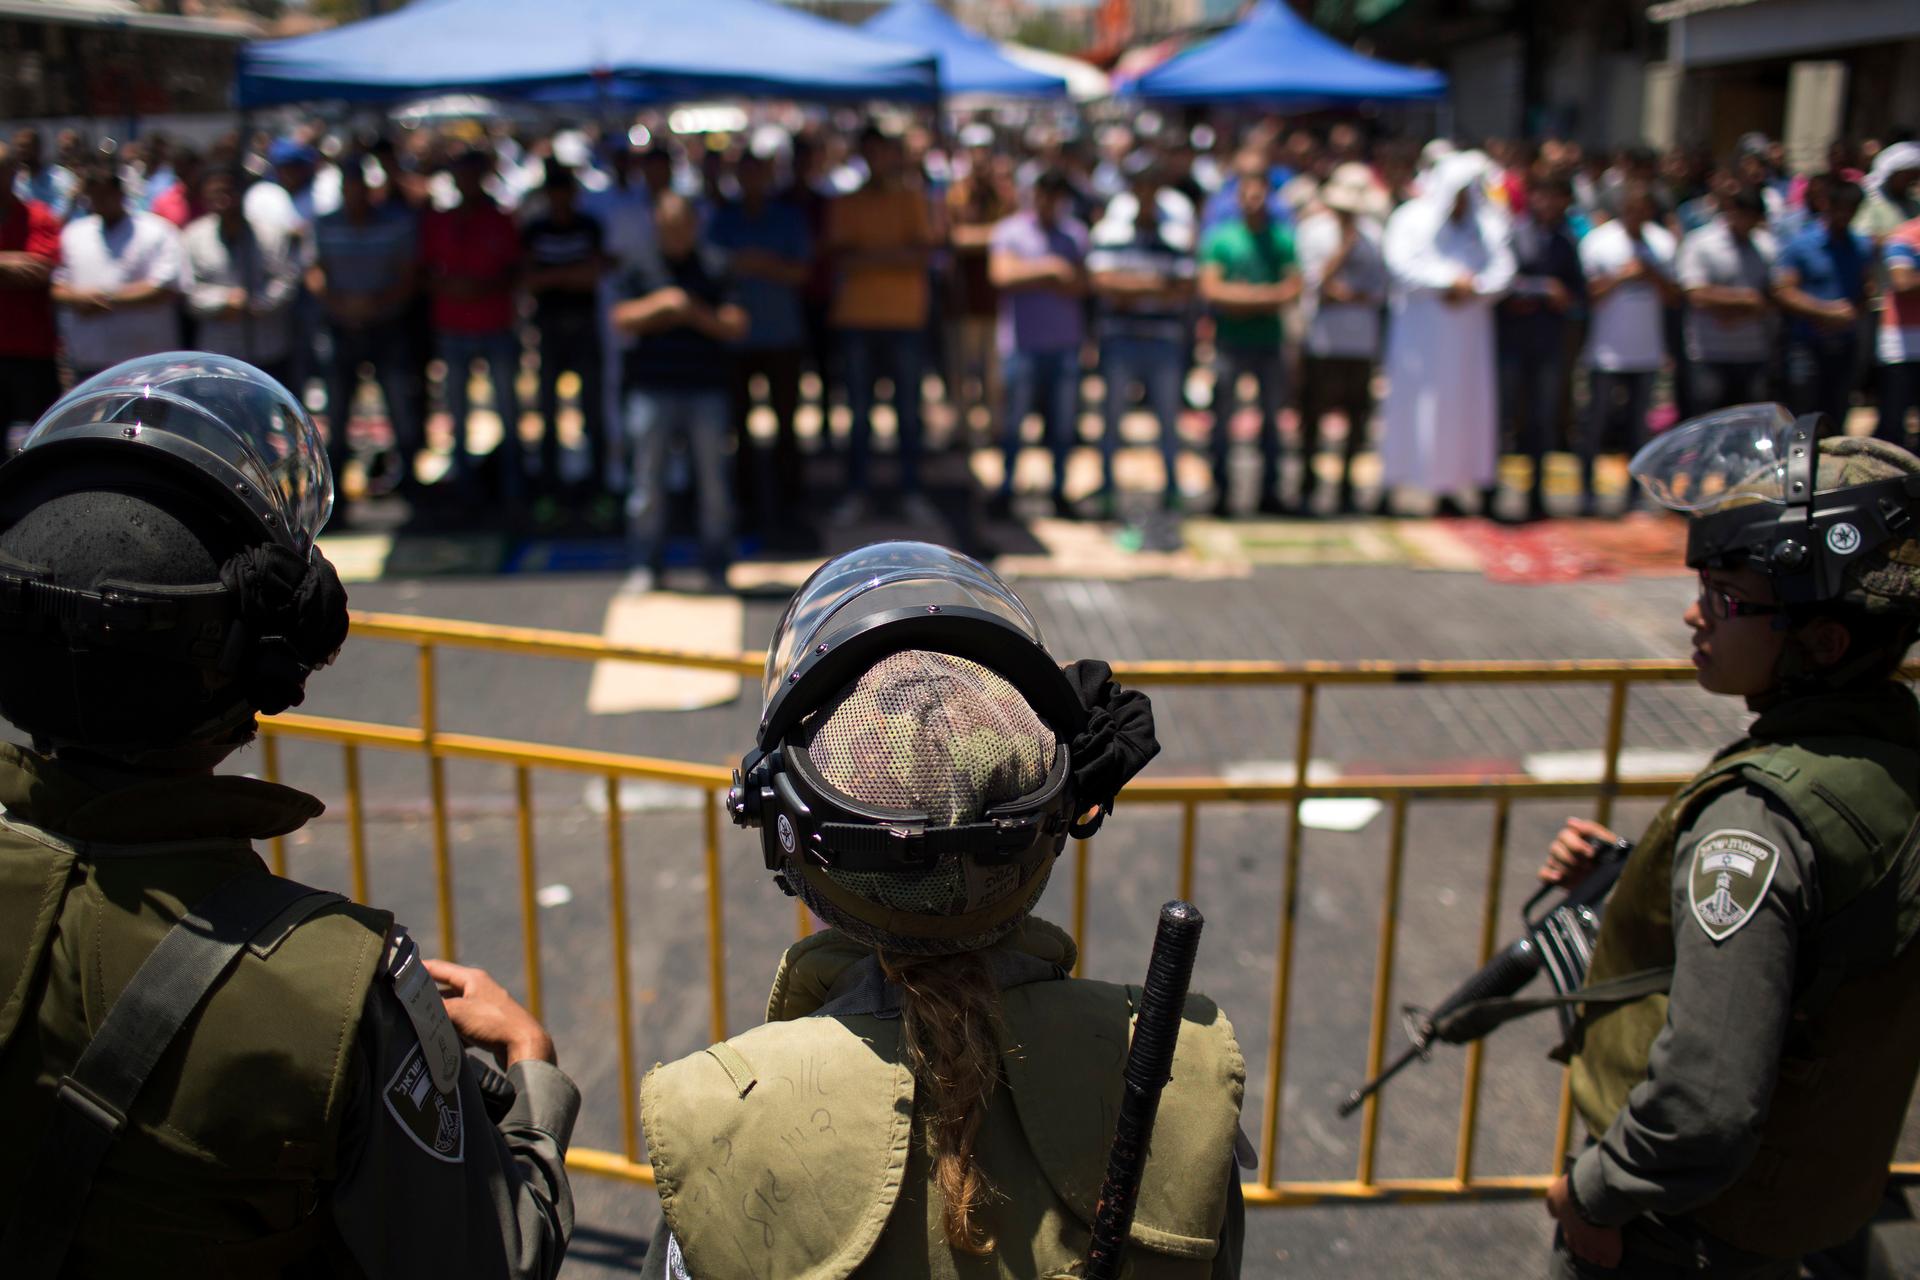 Israeli police stand guard behind as Palestinians pray on the last Friday of the holy month of Ramadan outside of the Old City in Jerusalem, on July 25, 2014.